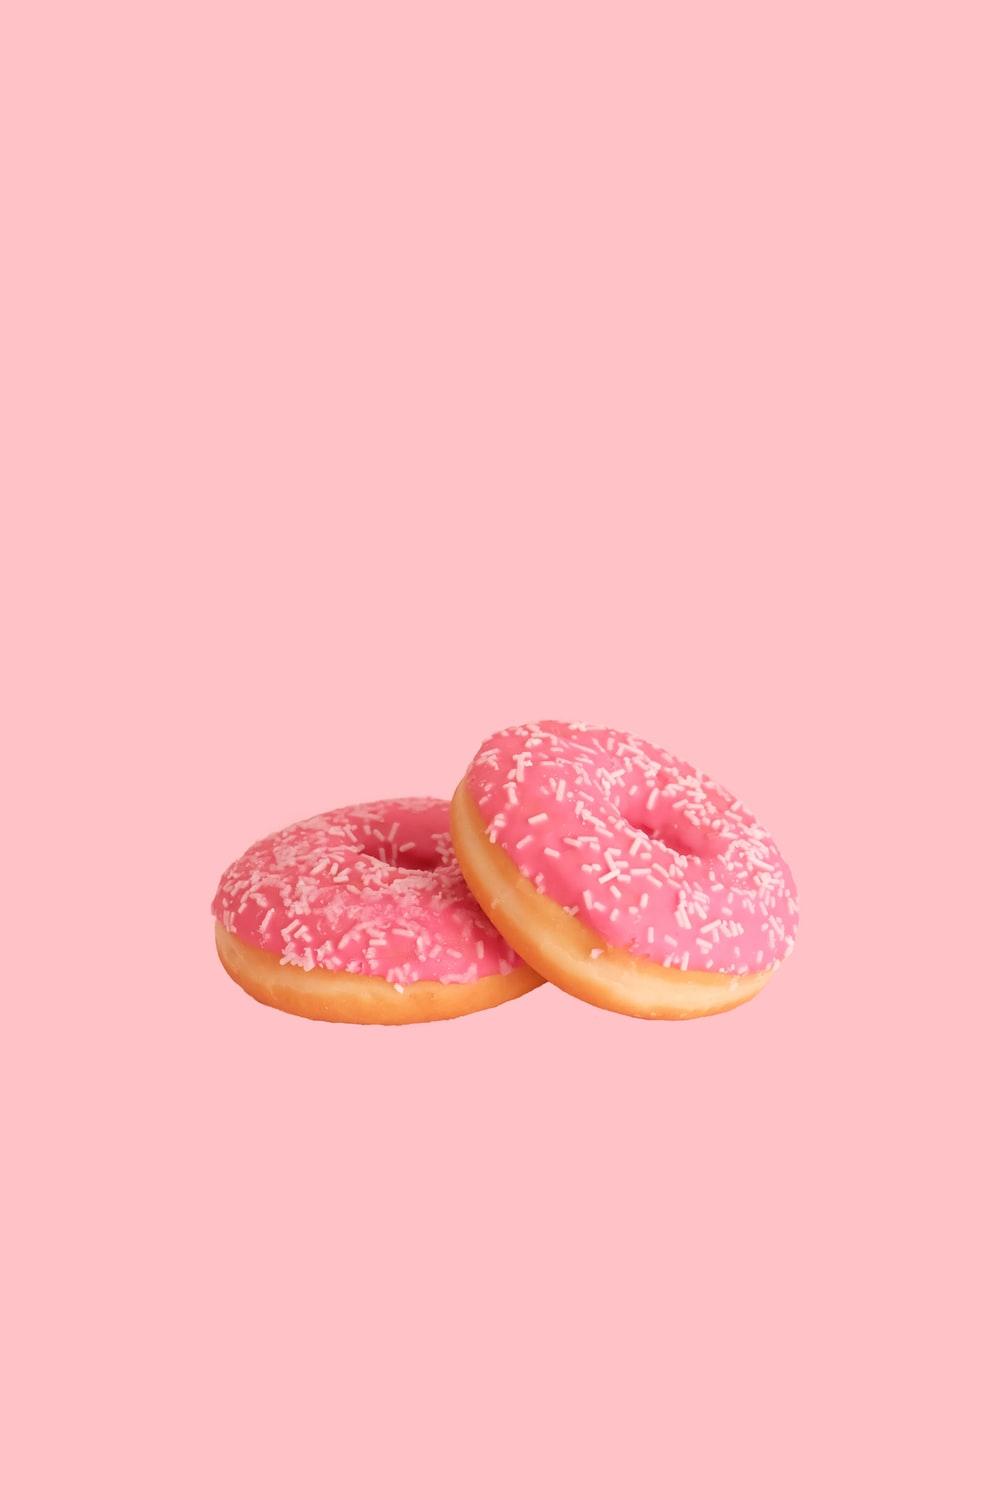 Donut Picture. Download Free Image